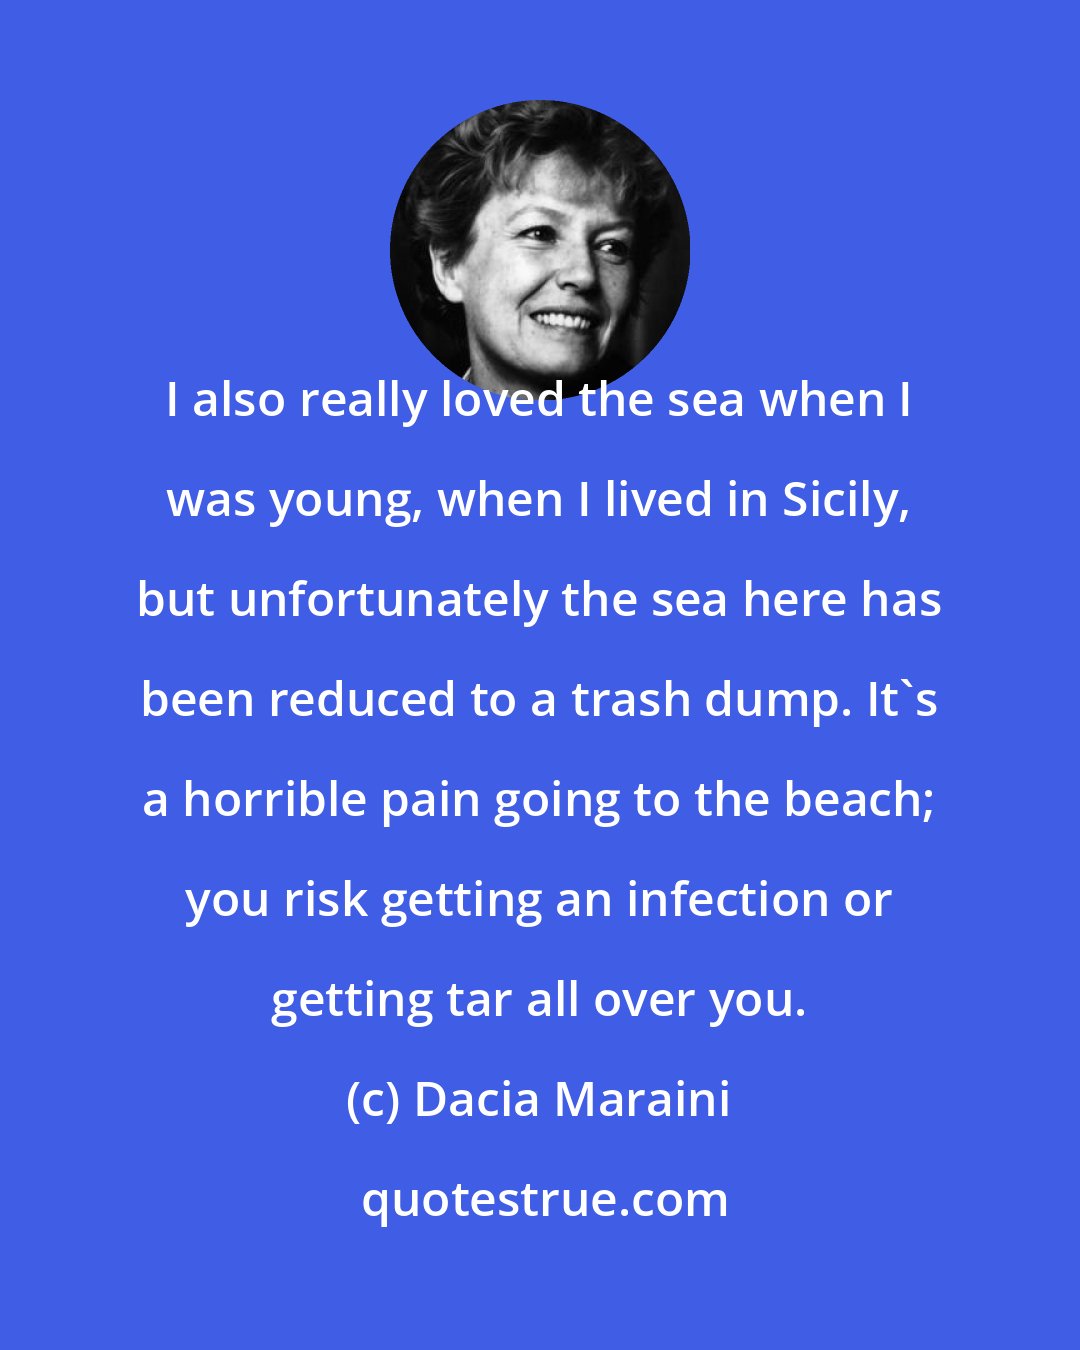 Dacia Maraini: I also really loved the sea when I was young, when I lived in Sicily, but unfortunately the sea here has been reduced to a trash dump. It's a horrible pain going to the beach; you risk getting an infection or getting tar all over you.